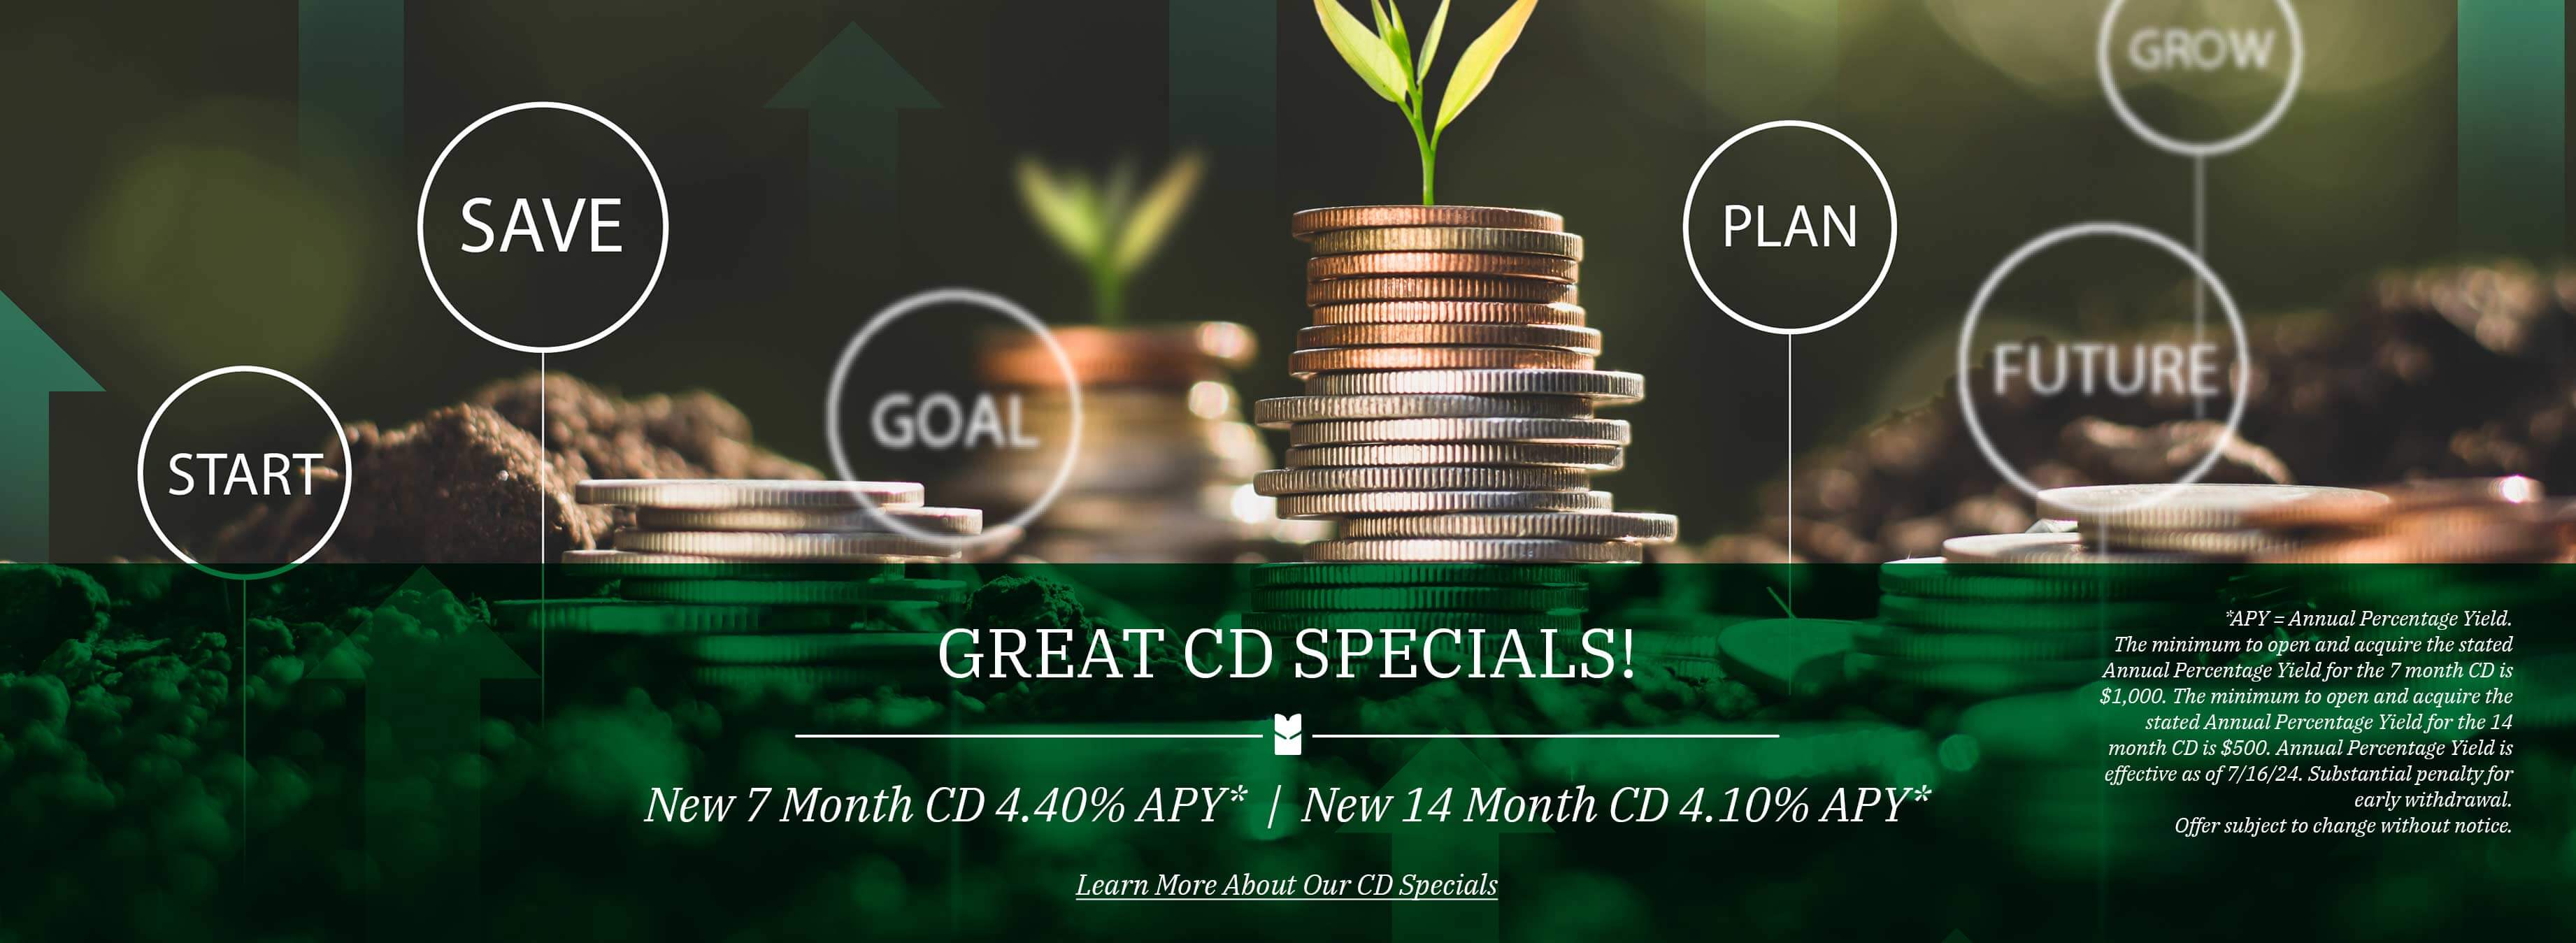 Great CD Specials! New 7 Month CD 4.40% APY. New 14 Month CD 4.10% APY. Learn more about our CD specials. *APY = Annual Percentage Yield. The minimum to open and acquire the stated Annual Percentage Yield for the 7 month CD is $1,000. The minimum to open and acquire the stated Annual Percentage Yield for the 14 month CD is $500. Annual Percentage Yield is effective as of 7/16/24. Substantial penalty for early withdrawal. Offer subject to change without notice.